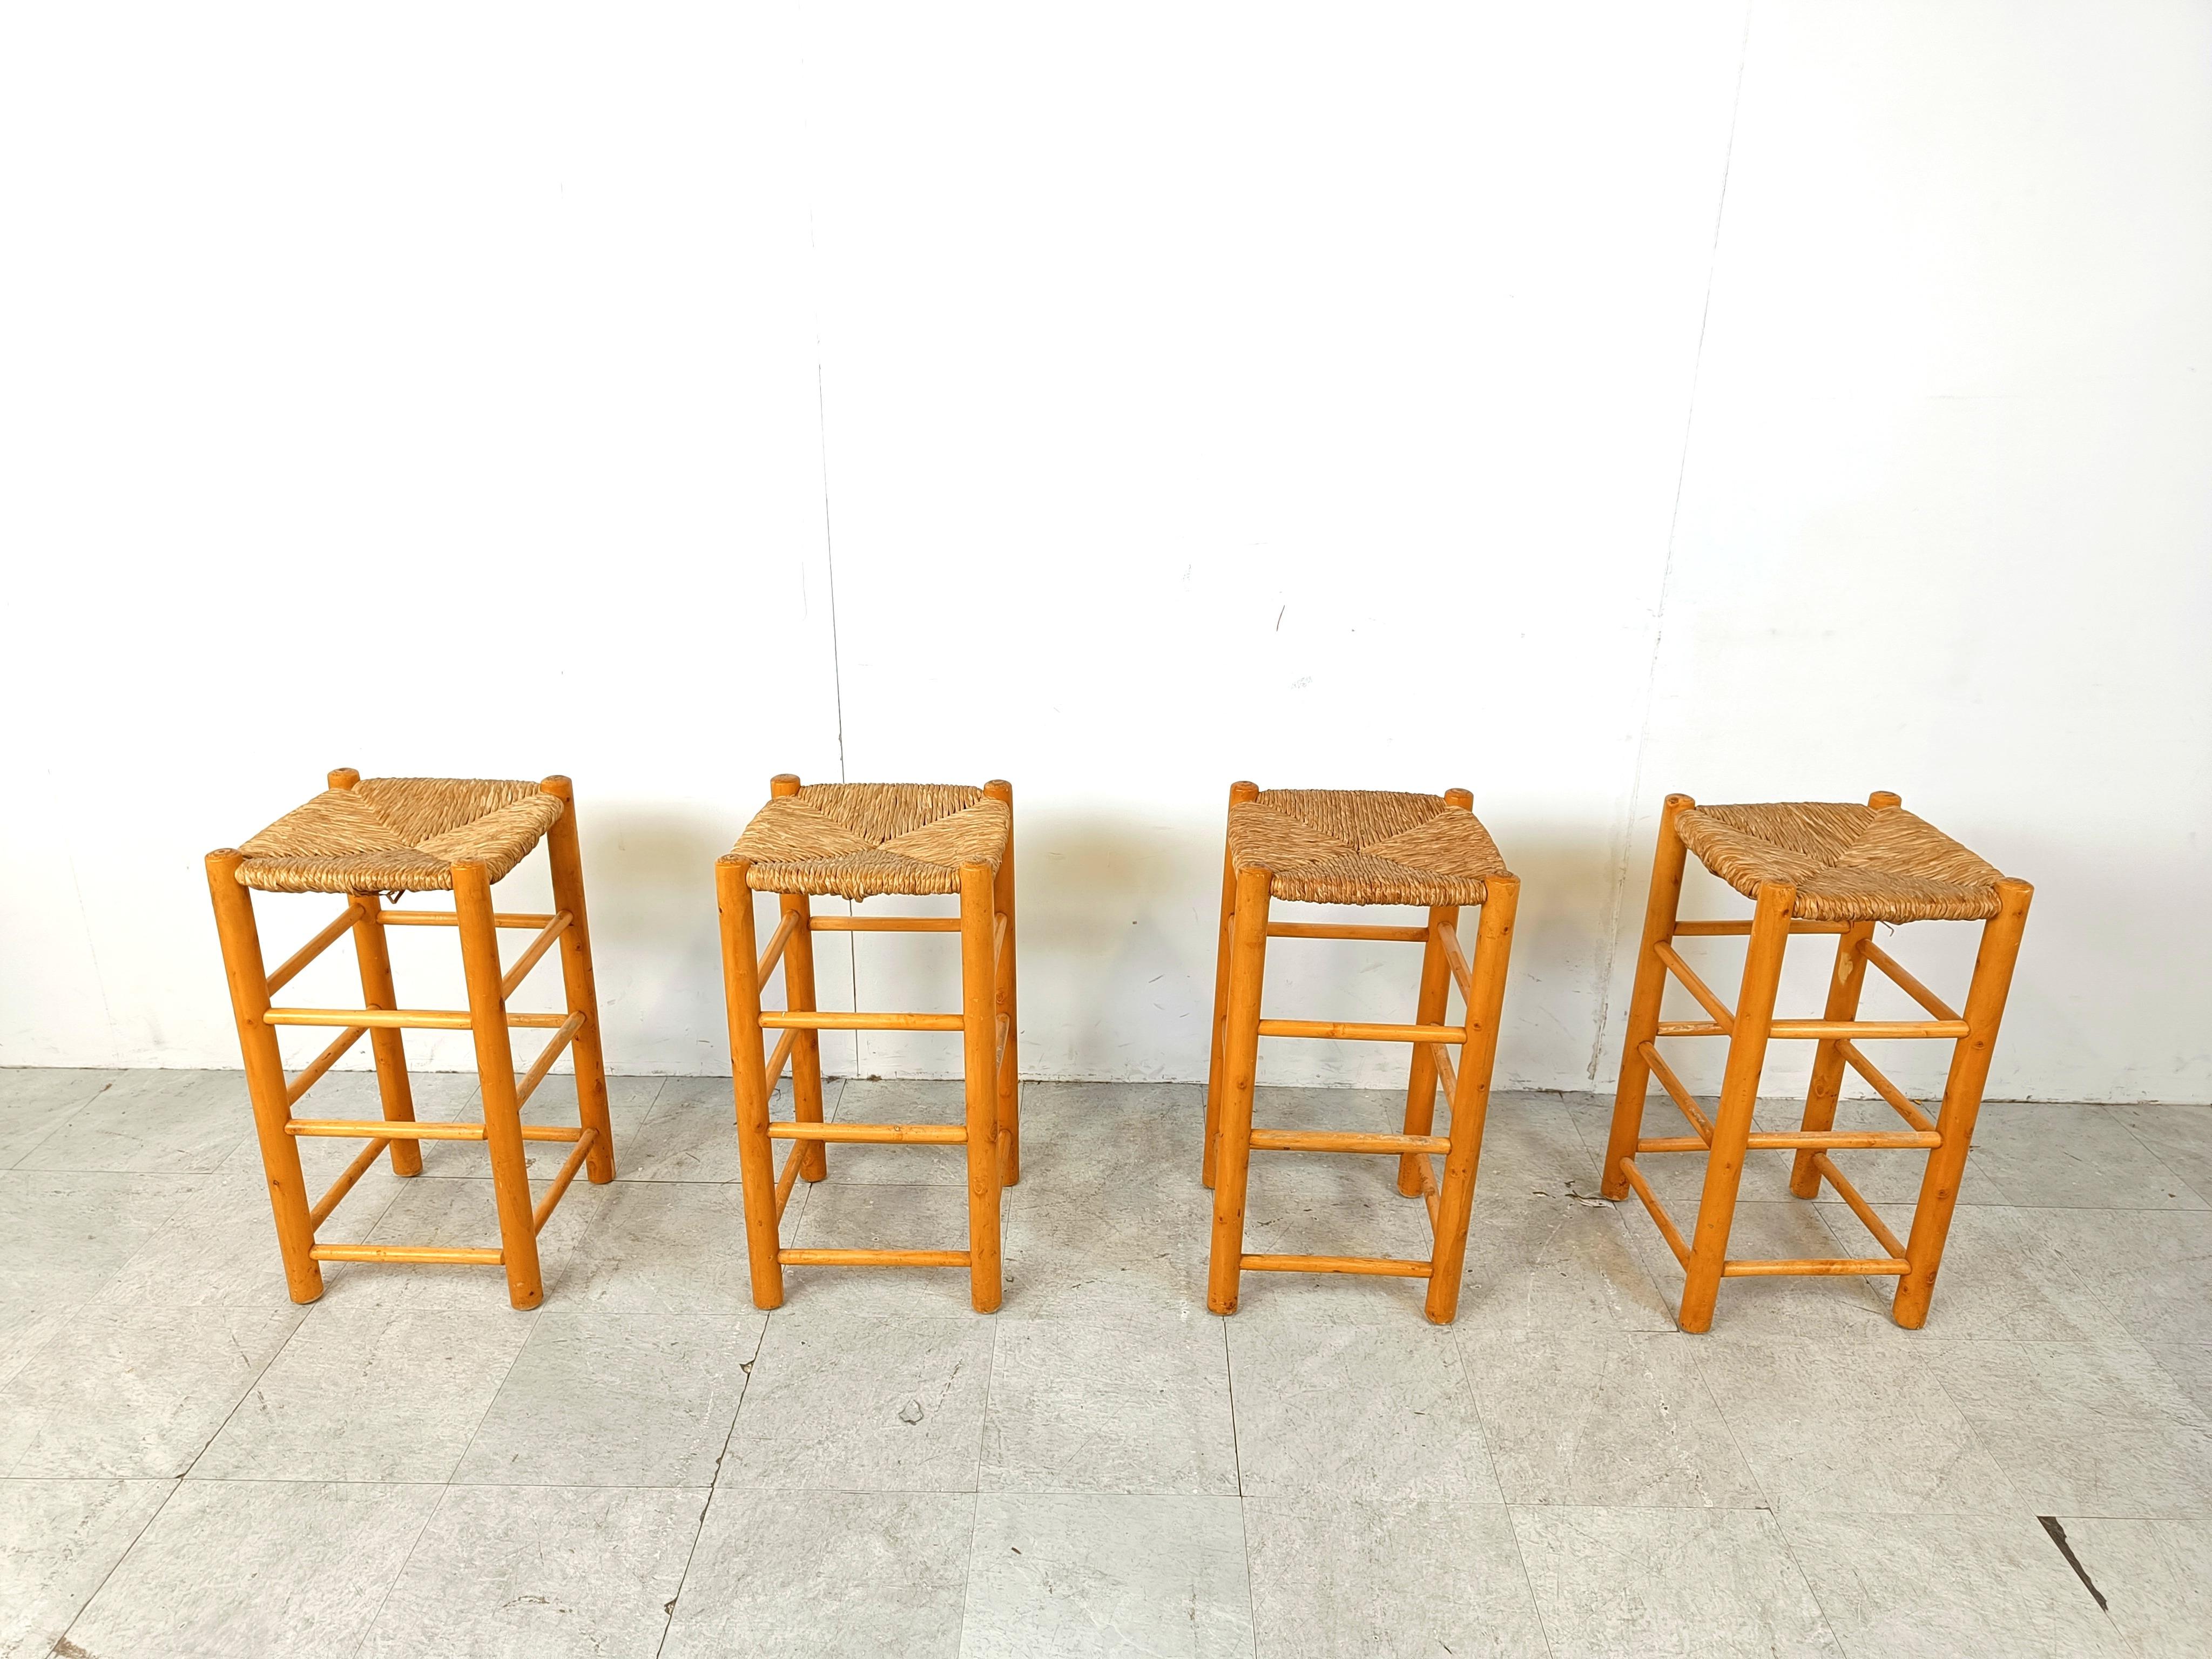 Set of 4 vintage bar stools with wooden frames and wicker seats.

Elegant vintage pieces with a rustic touch.

Good condition with sturdy wicker seats.

1960s - Belgium

Dimensions:
Height: 66cm
Width x depth: 33cm

Ref.: 157269

*Price is for the